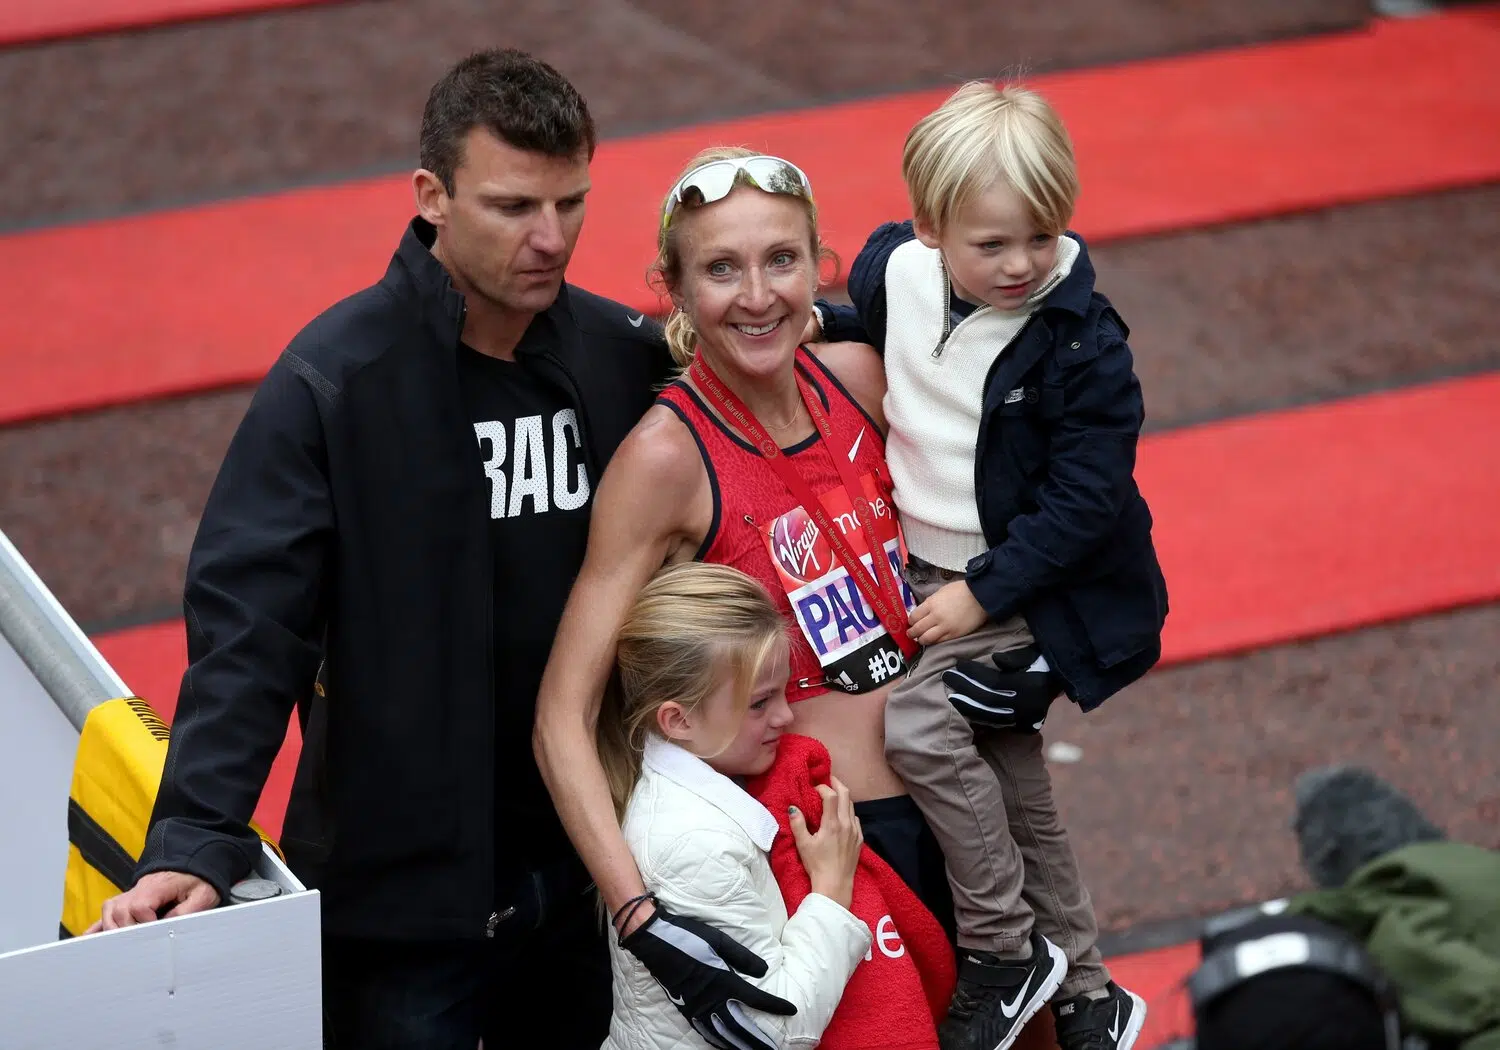 Paula radcliffe and family after the london marathon 2015